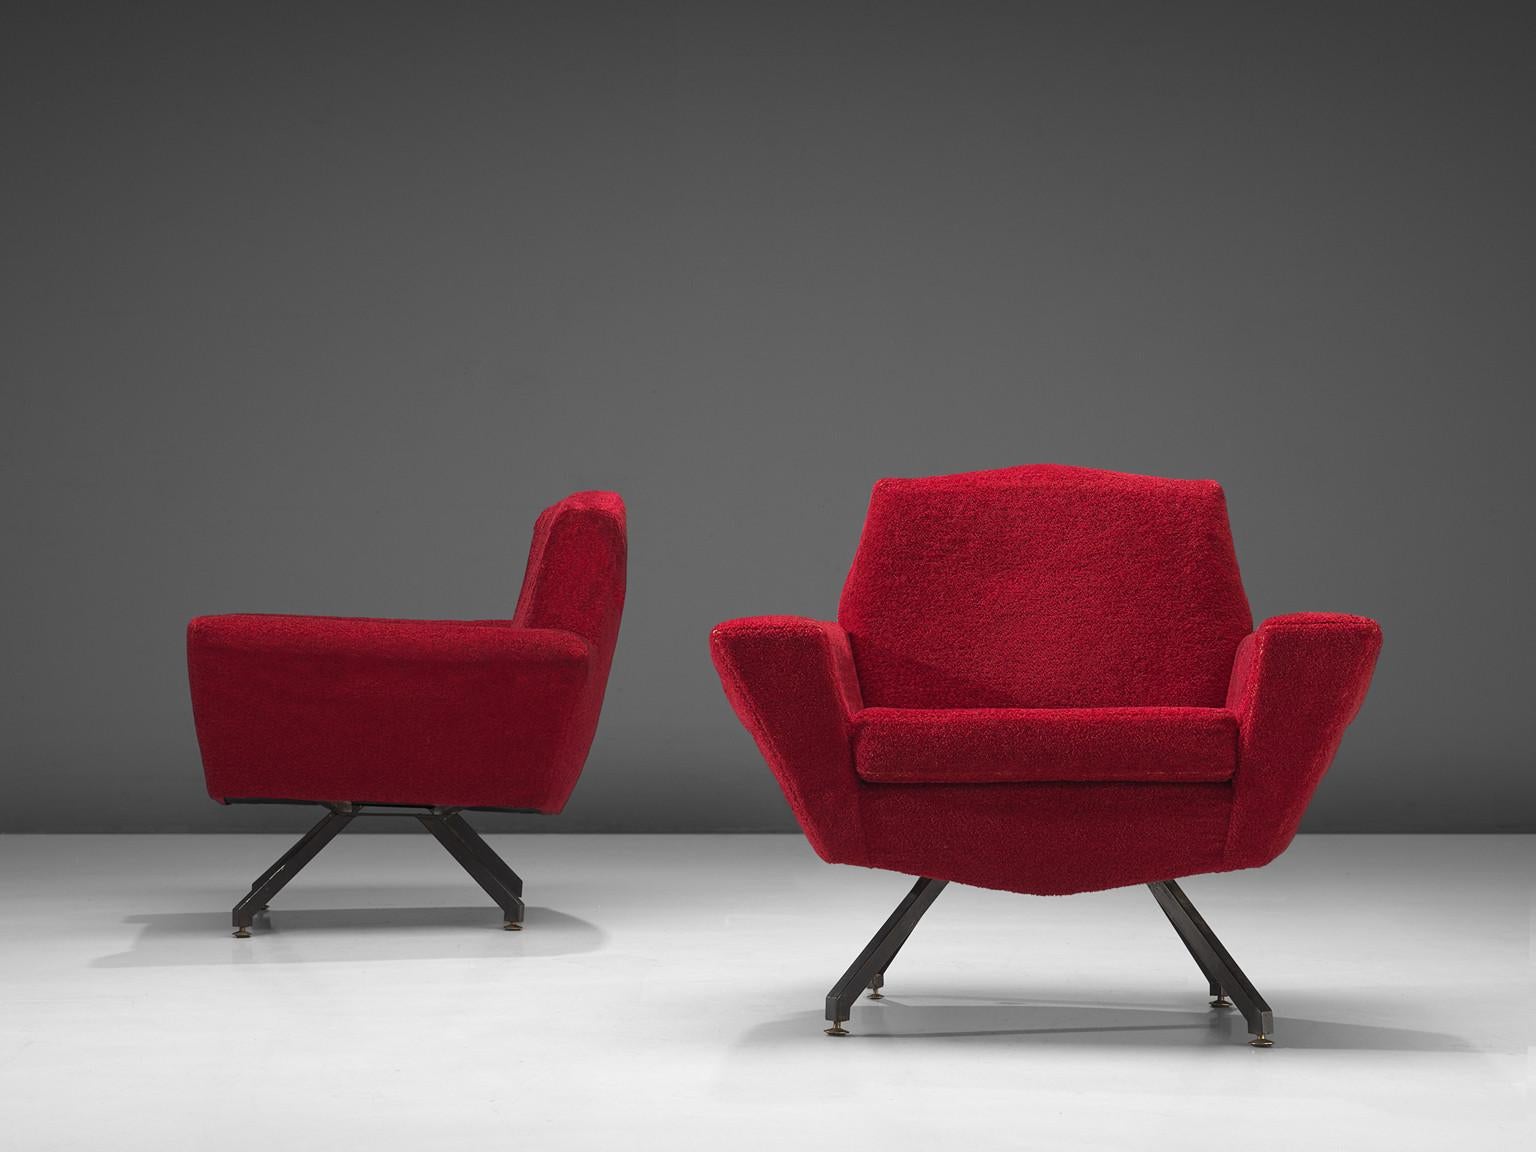 Italian Studio APA for Lenzi Pair of Lounge Chairs in Red Upholstery  For Sale